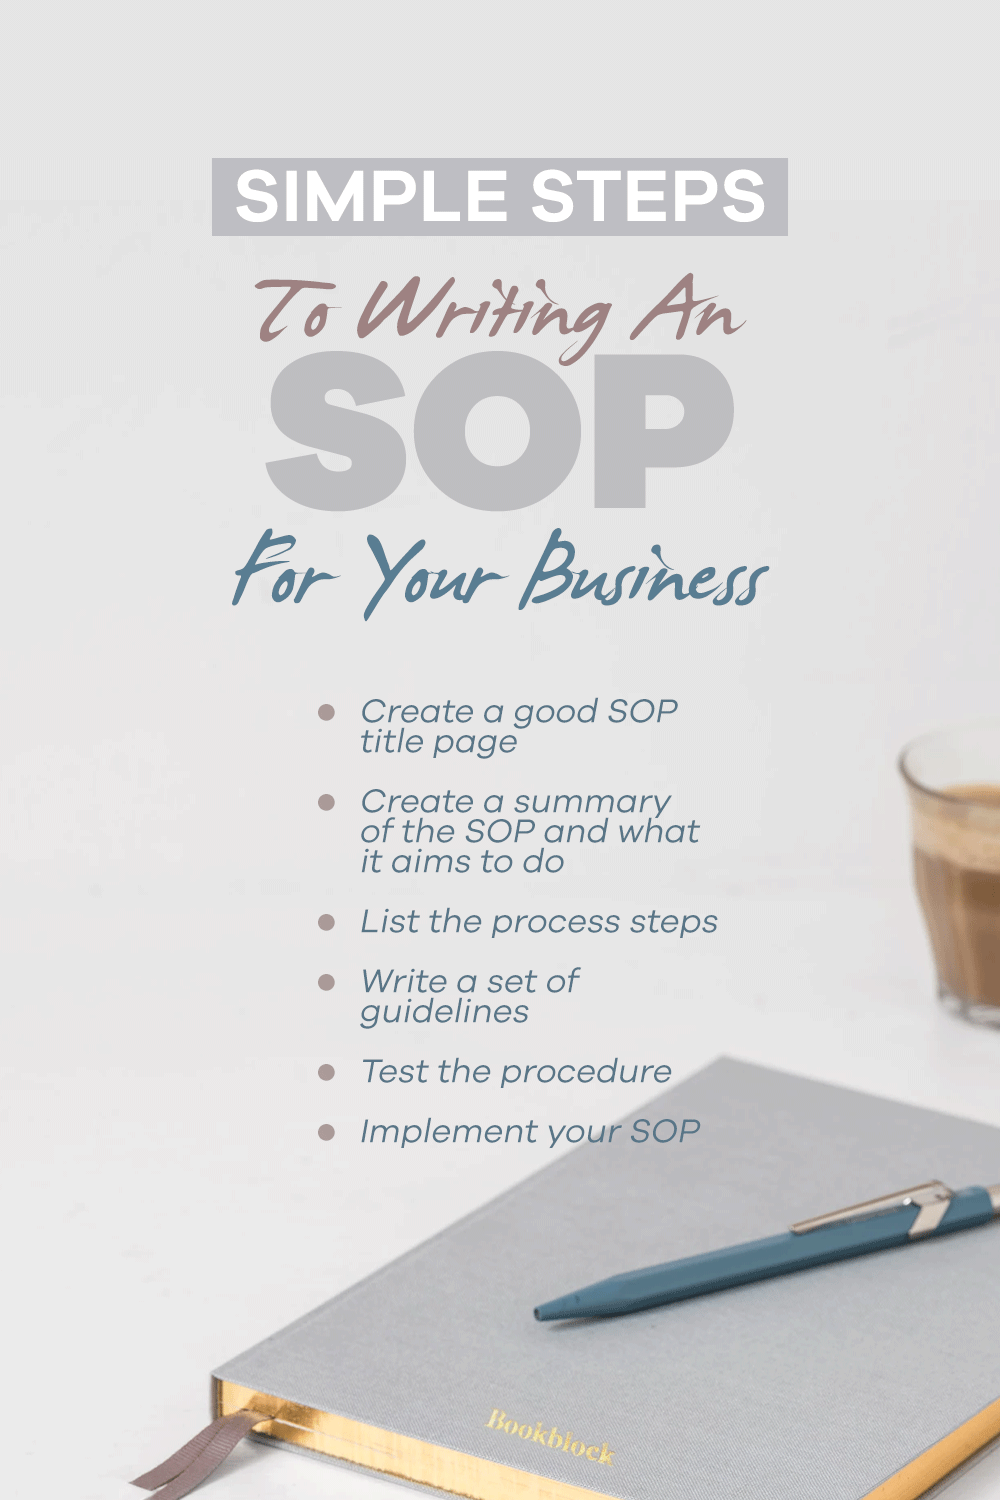 Simple Steps to Writing an SOP for your Business